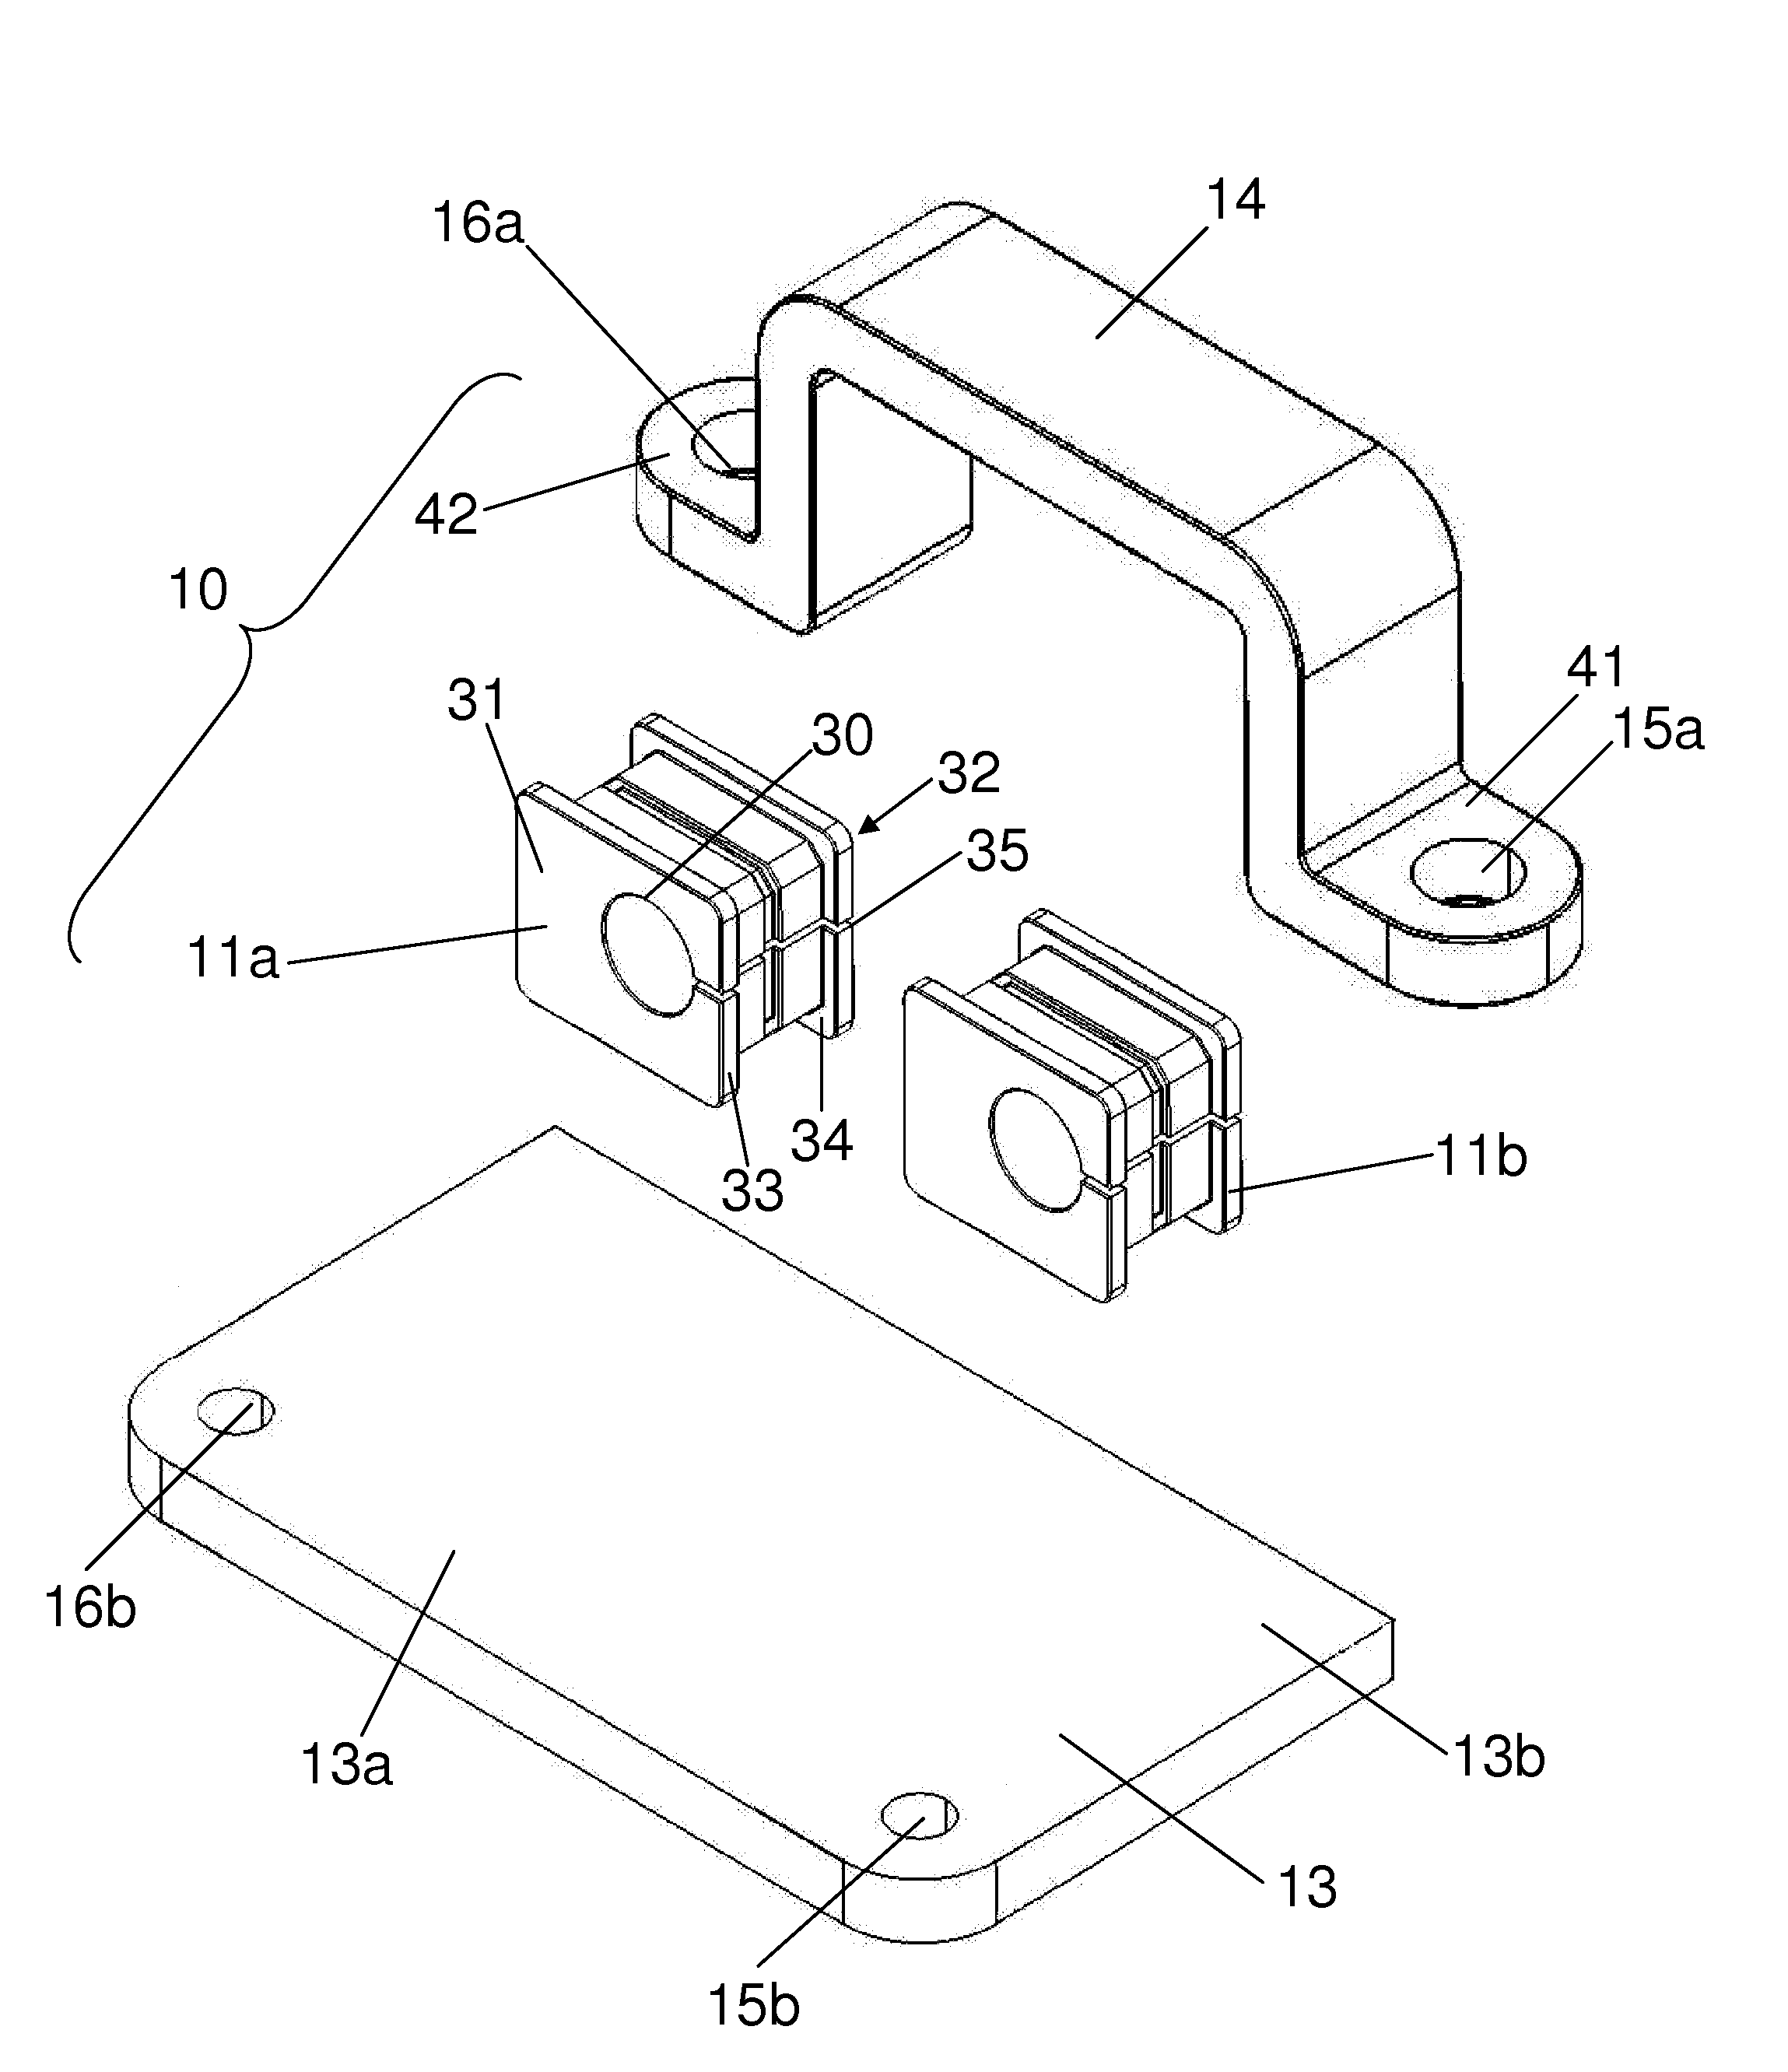 Clamp block assembly